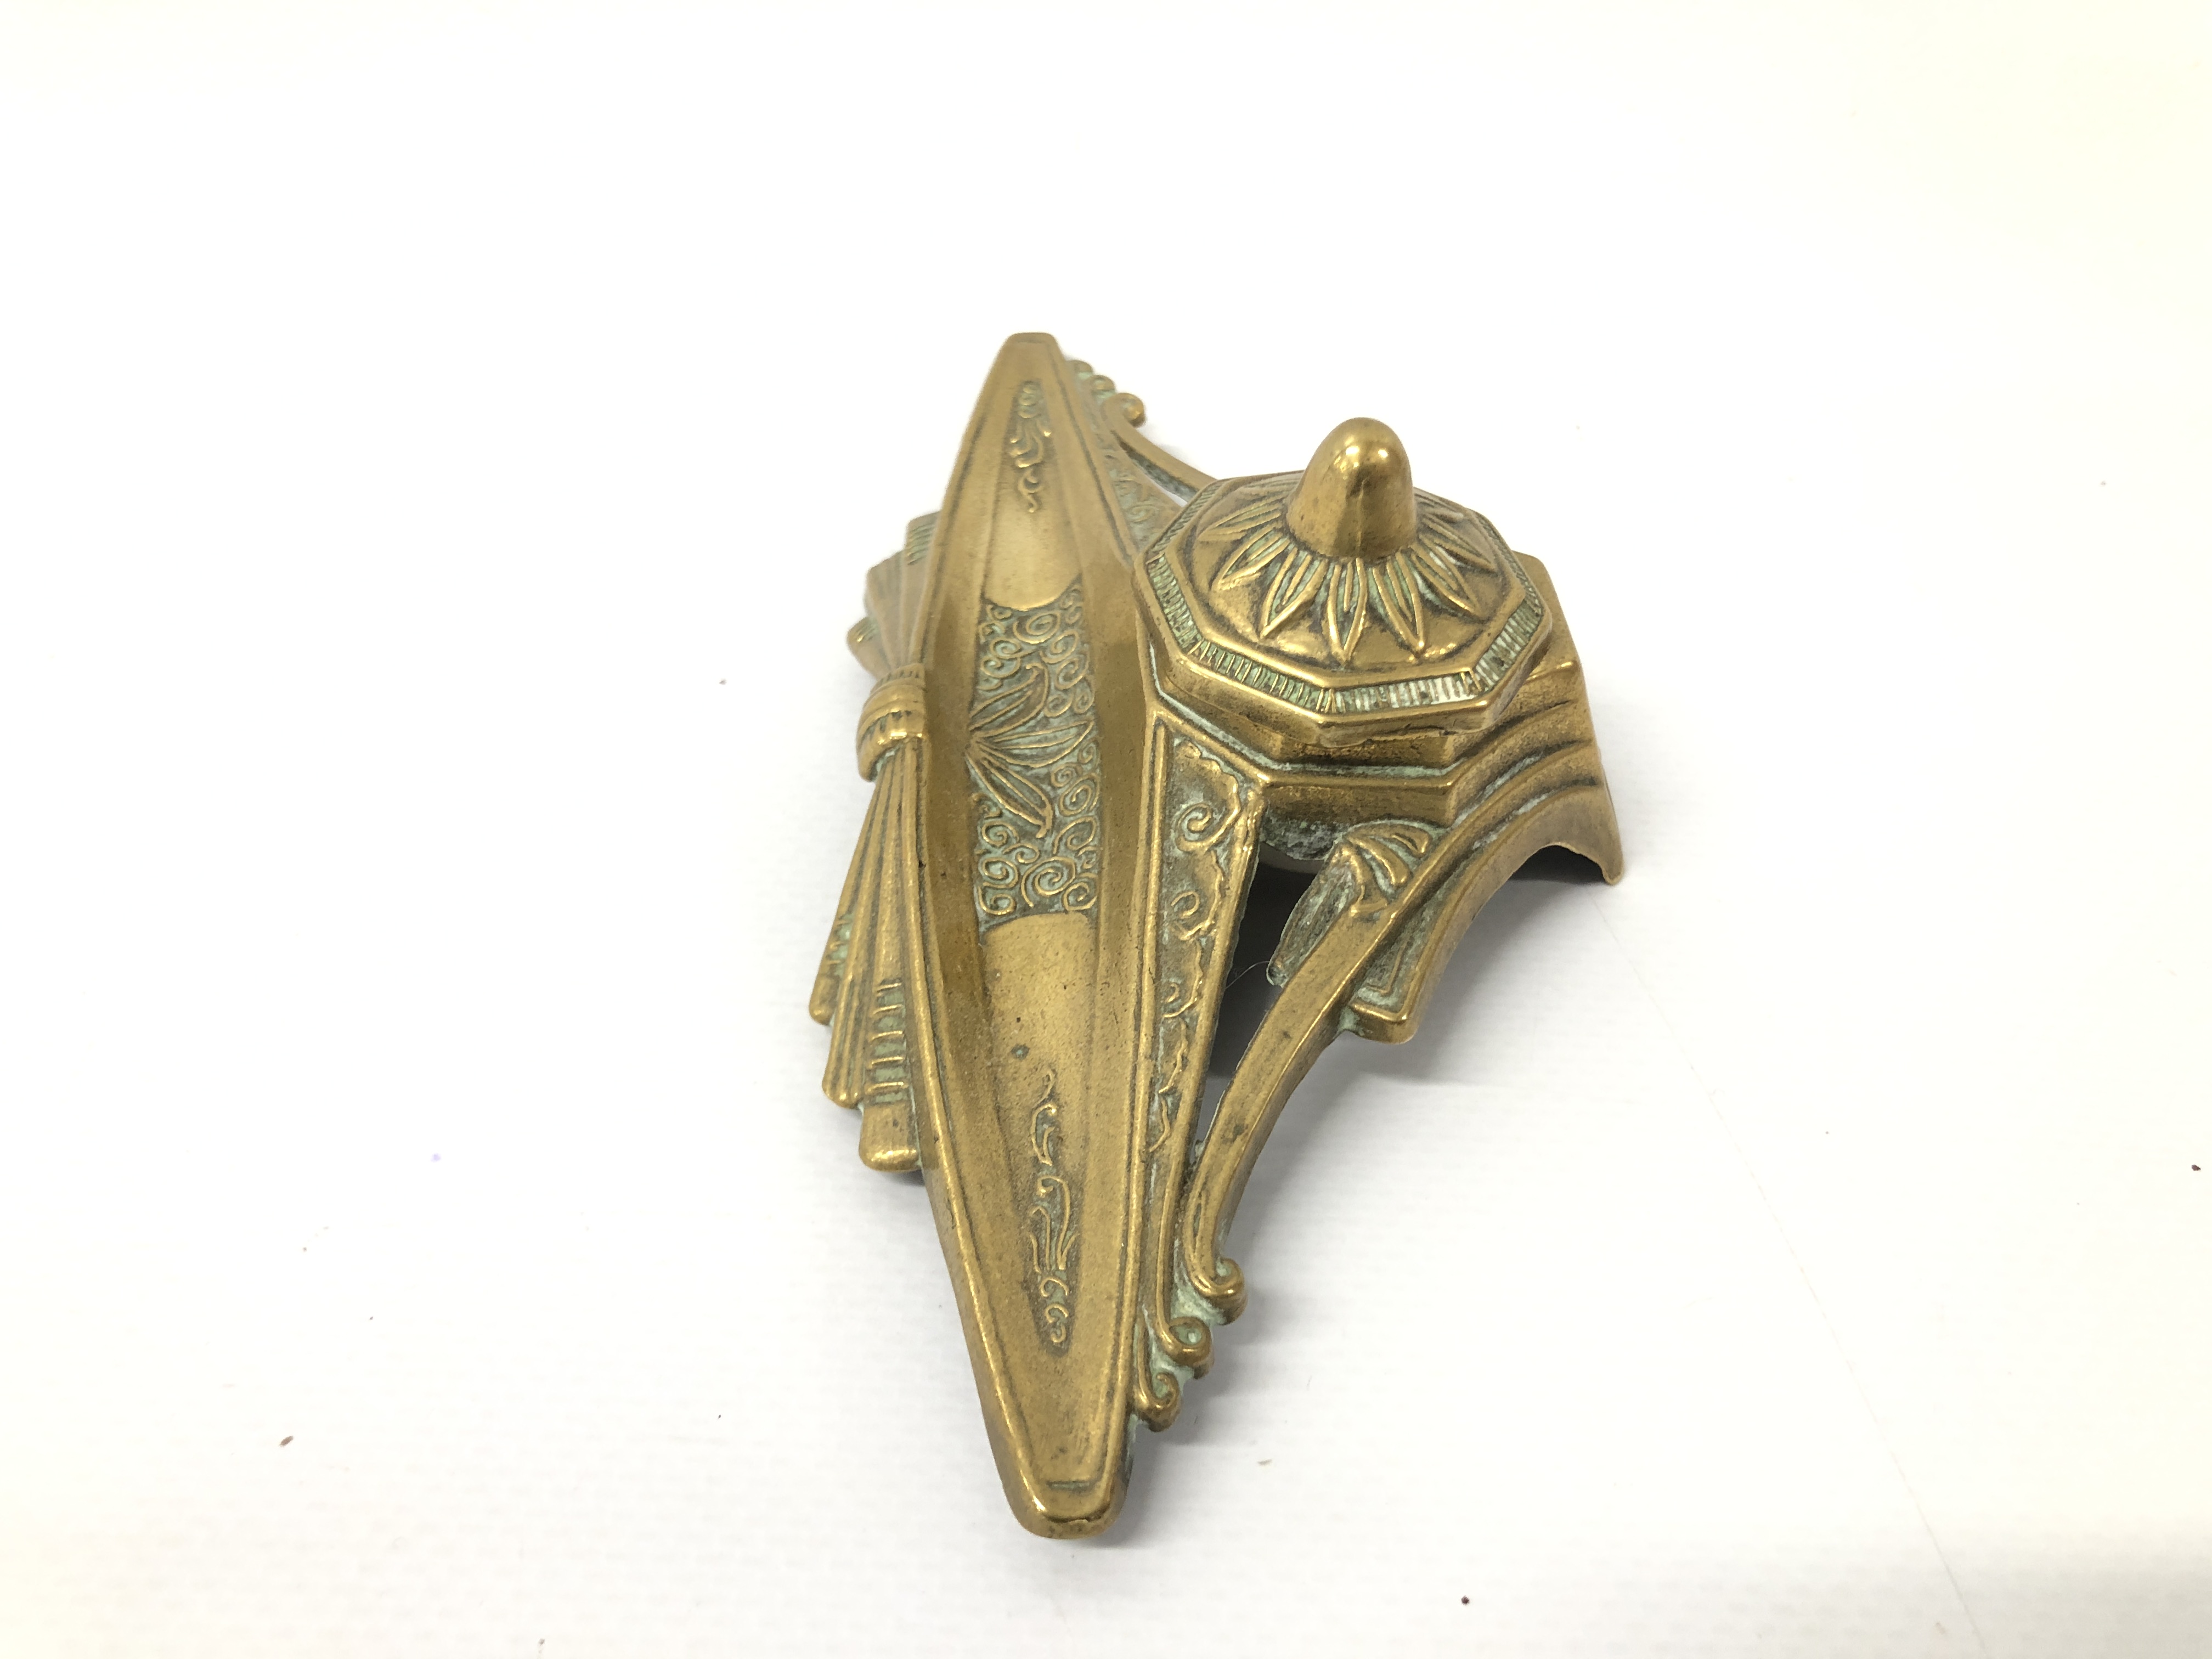 DECORATIVE BRASS INKWELL, HEAVY BRASS KINGFISHER ORNAMENT ON A DECORATIVE ENGRAVED BASE, - Image 6 of 10